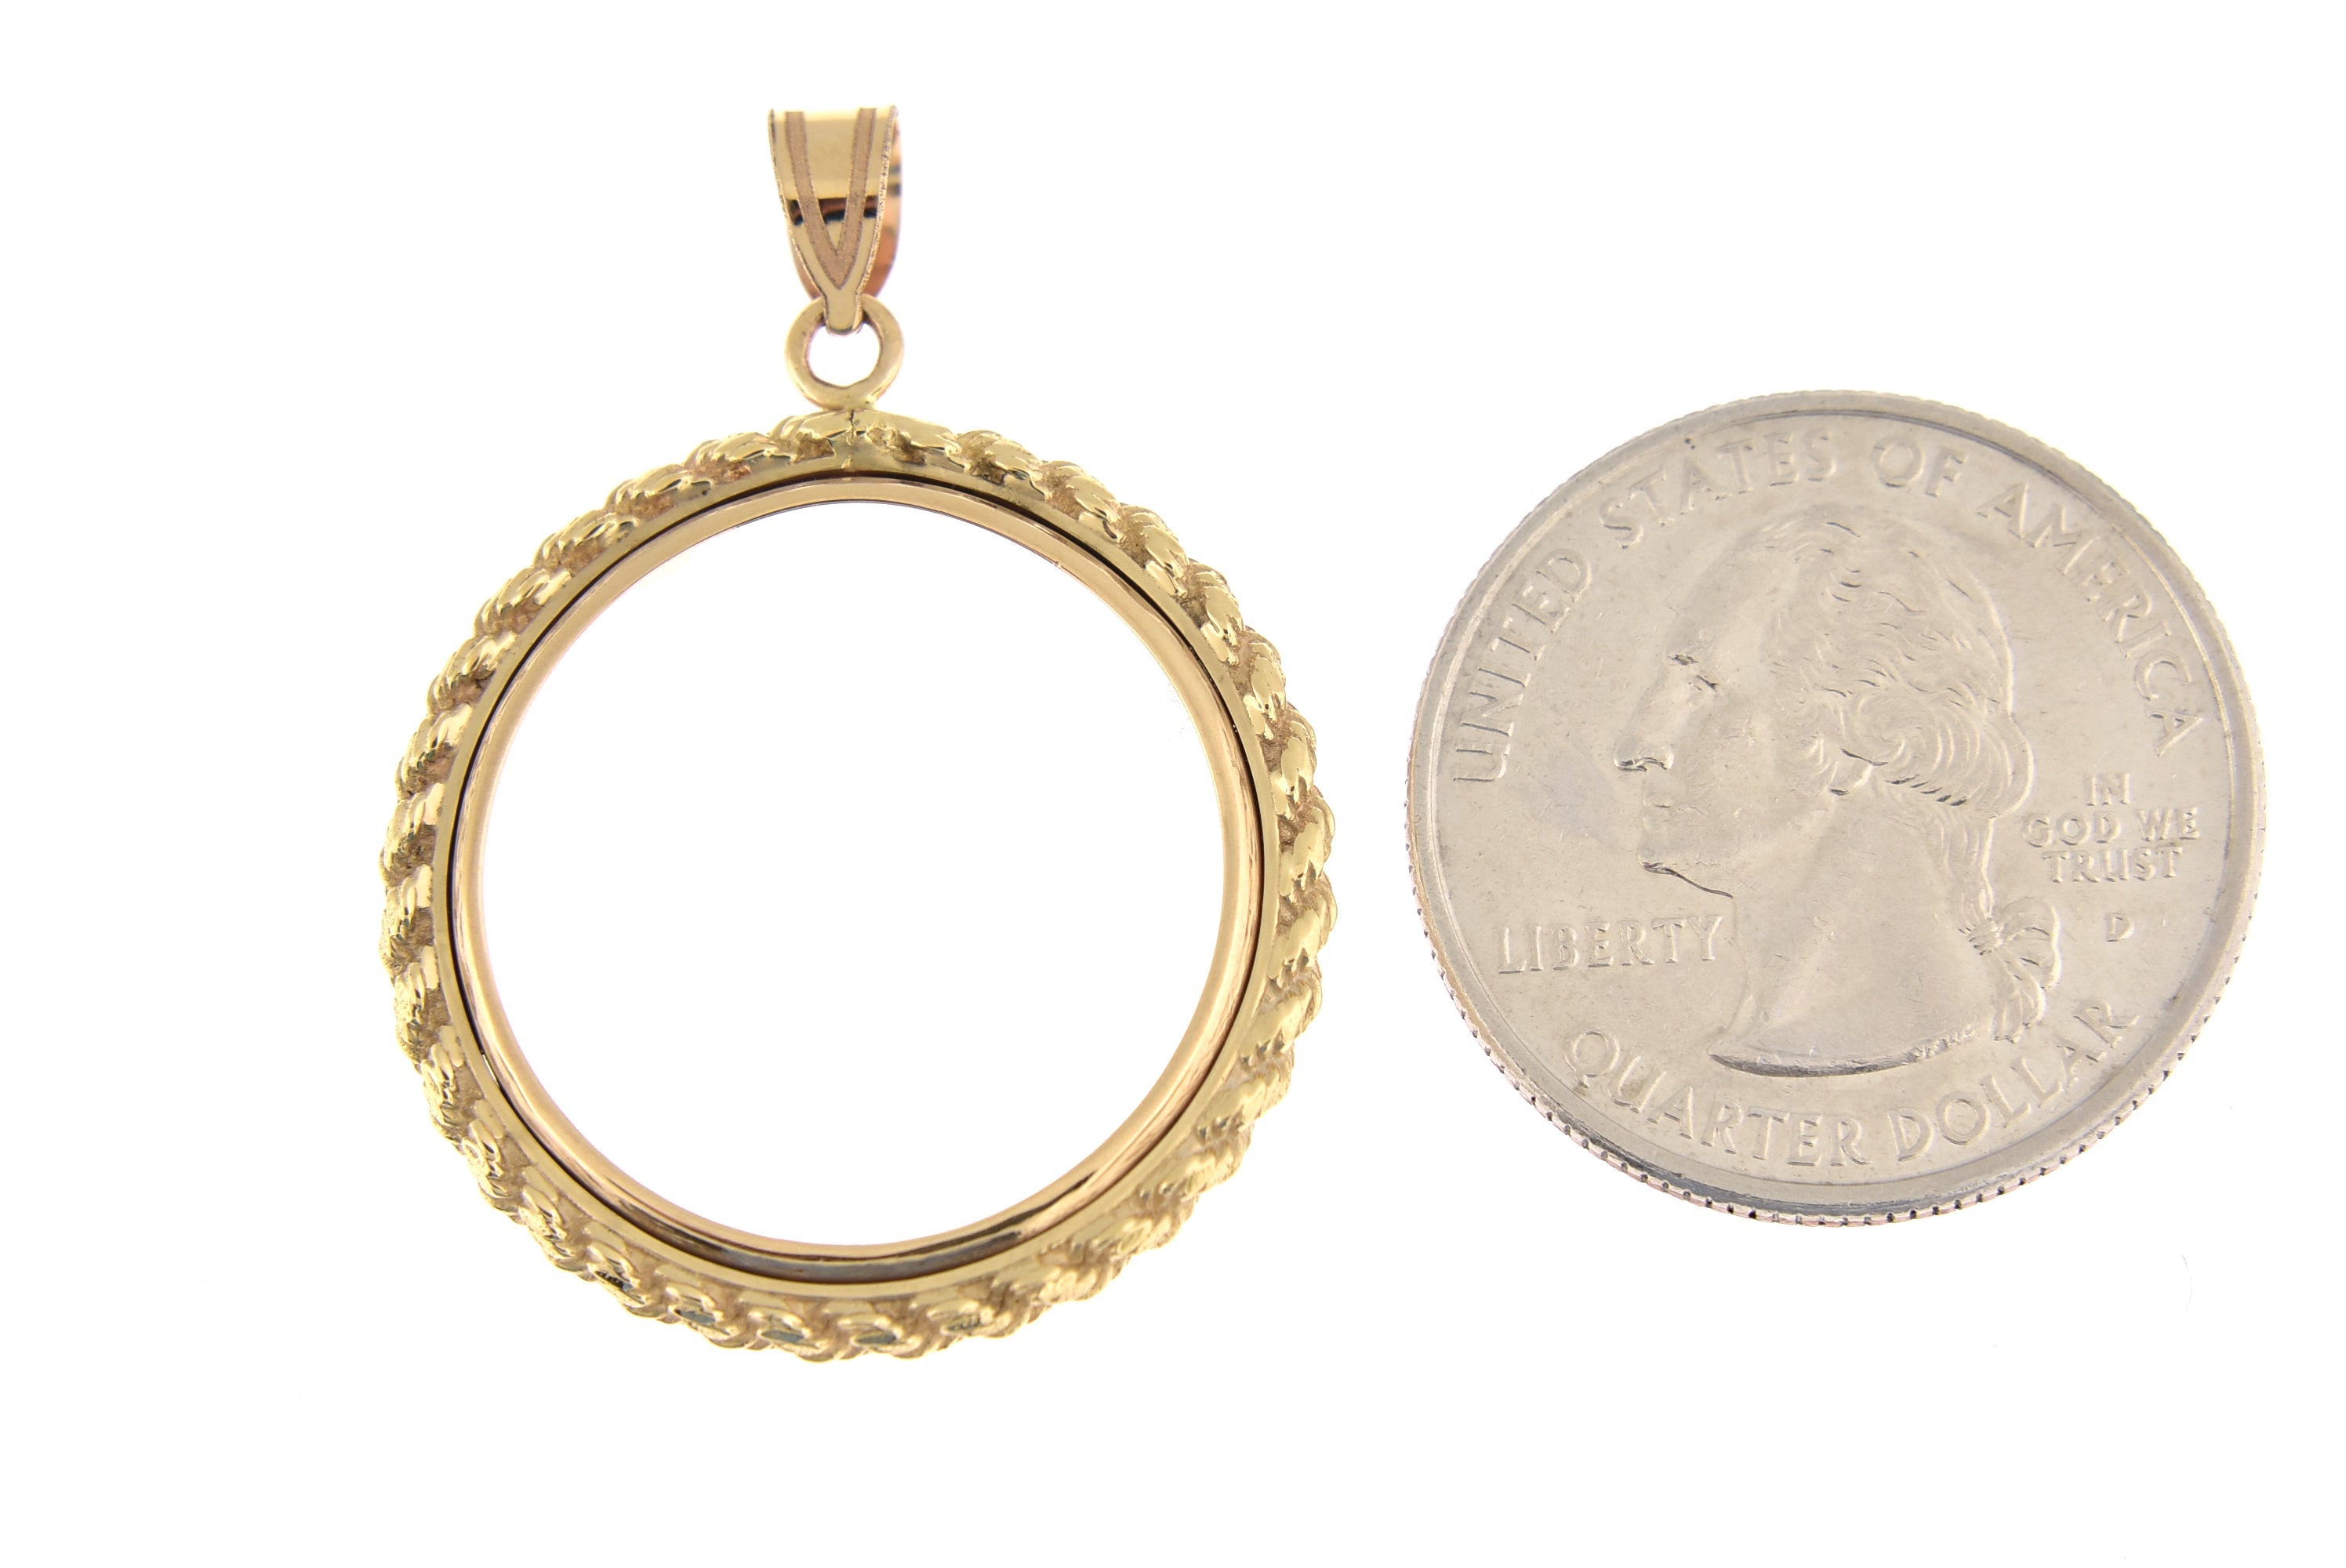 14K Yellow Gold 1/4 oz American Eagle 1/4 oz Panda US $5 Dollar Jamestown 2 Rand Coin Holder Rope Polished Prong Bezel Pendant Charm for 22mm Coins